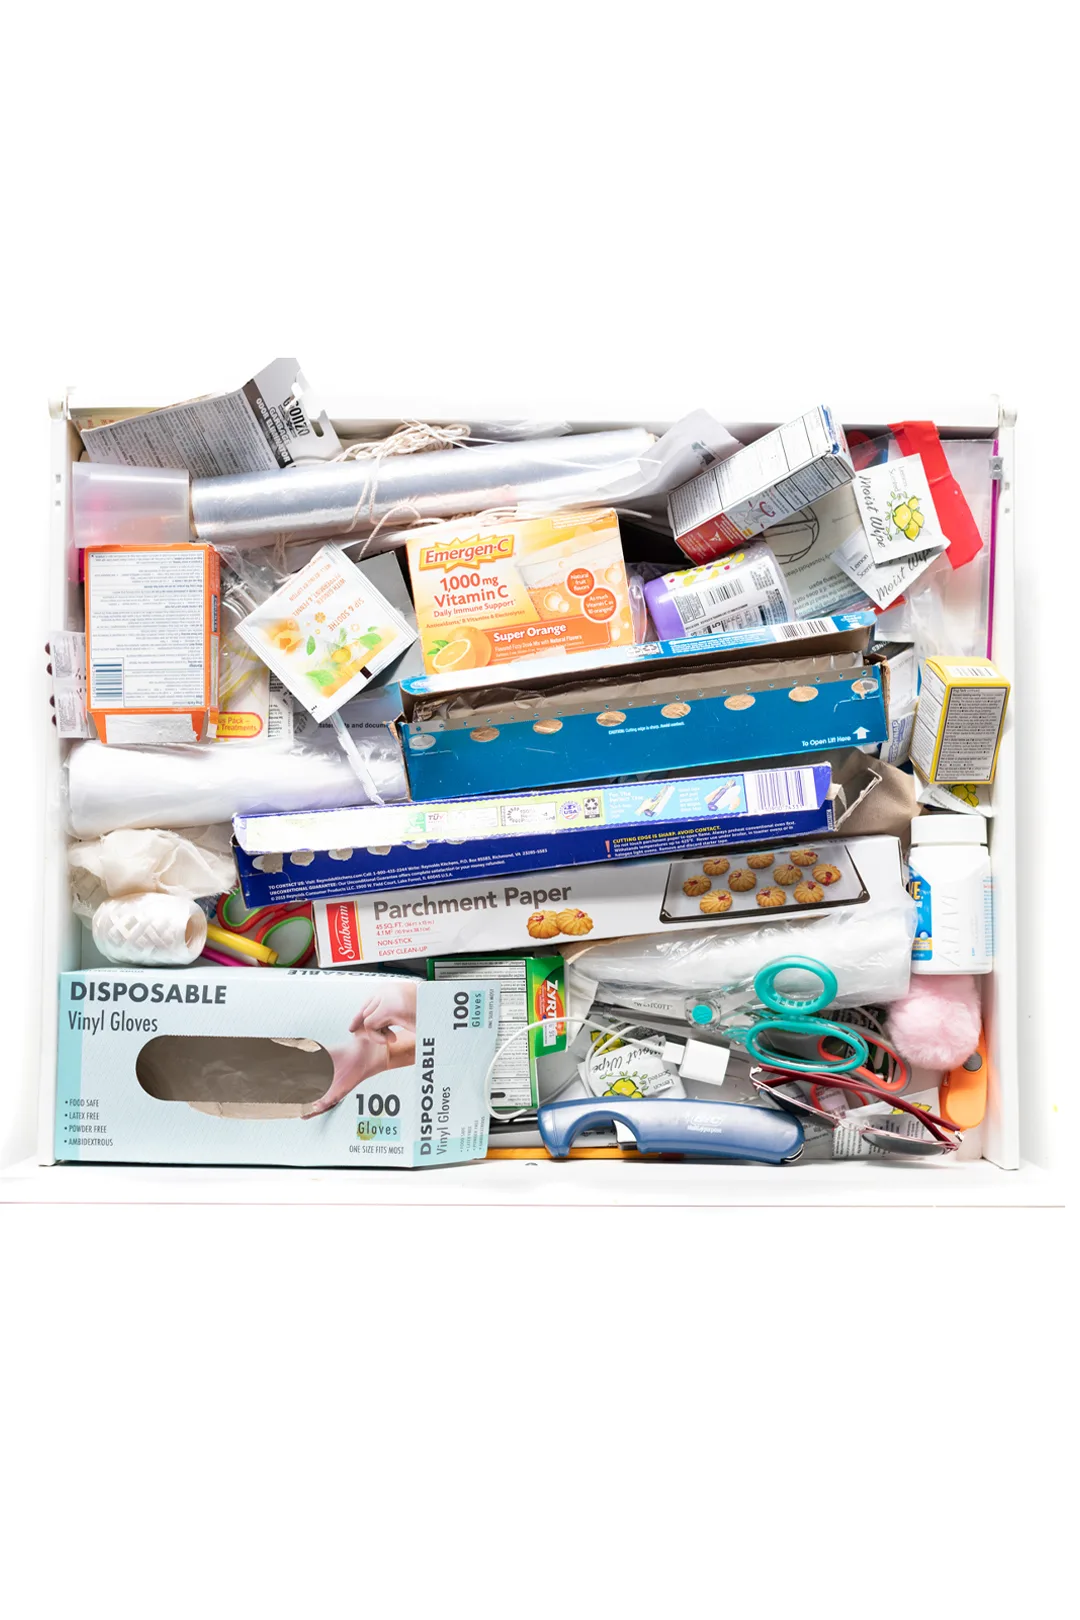 messy junk drawer with a variety of random items stuffed into from medicines to foil.